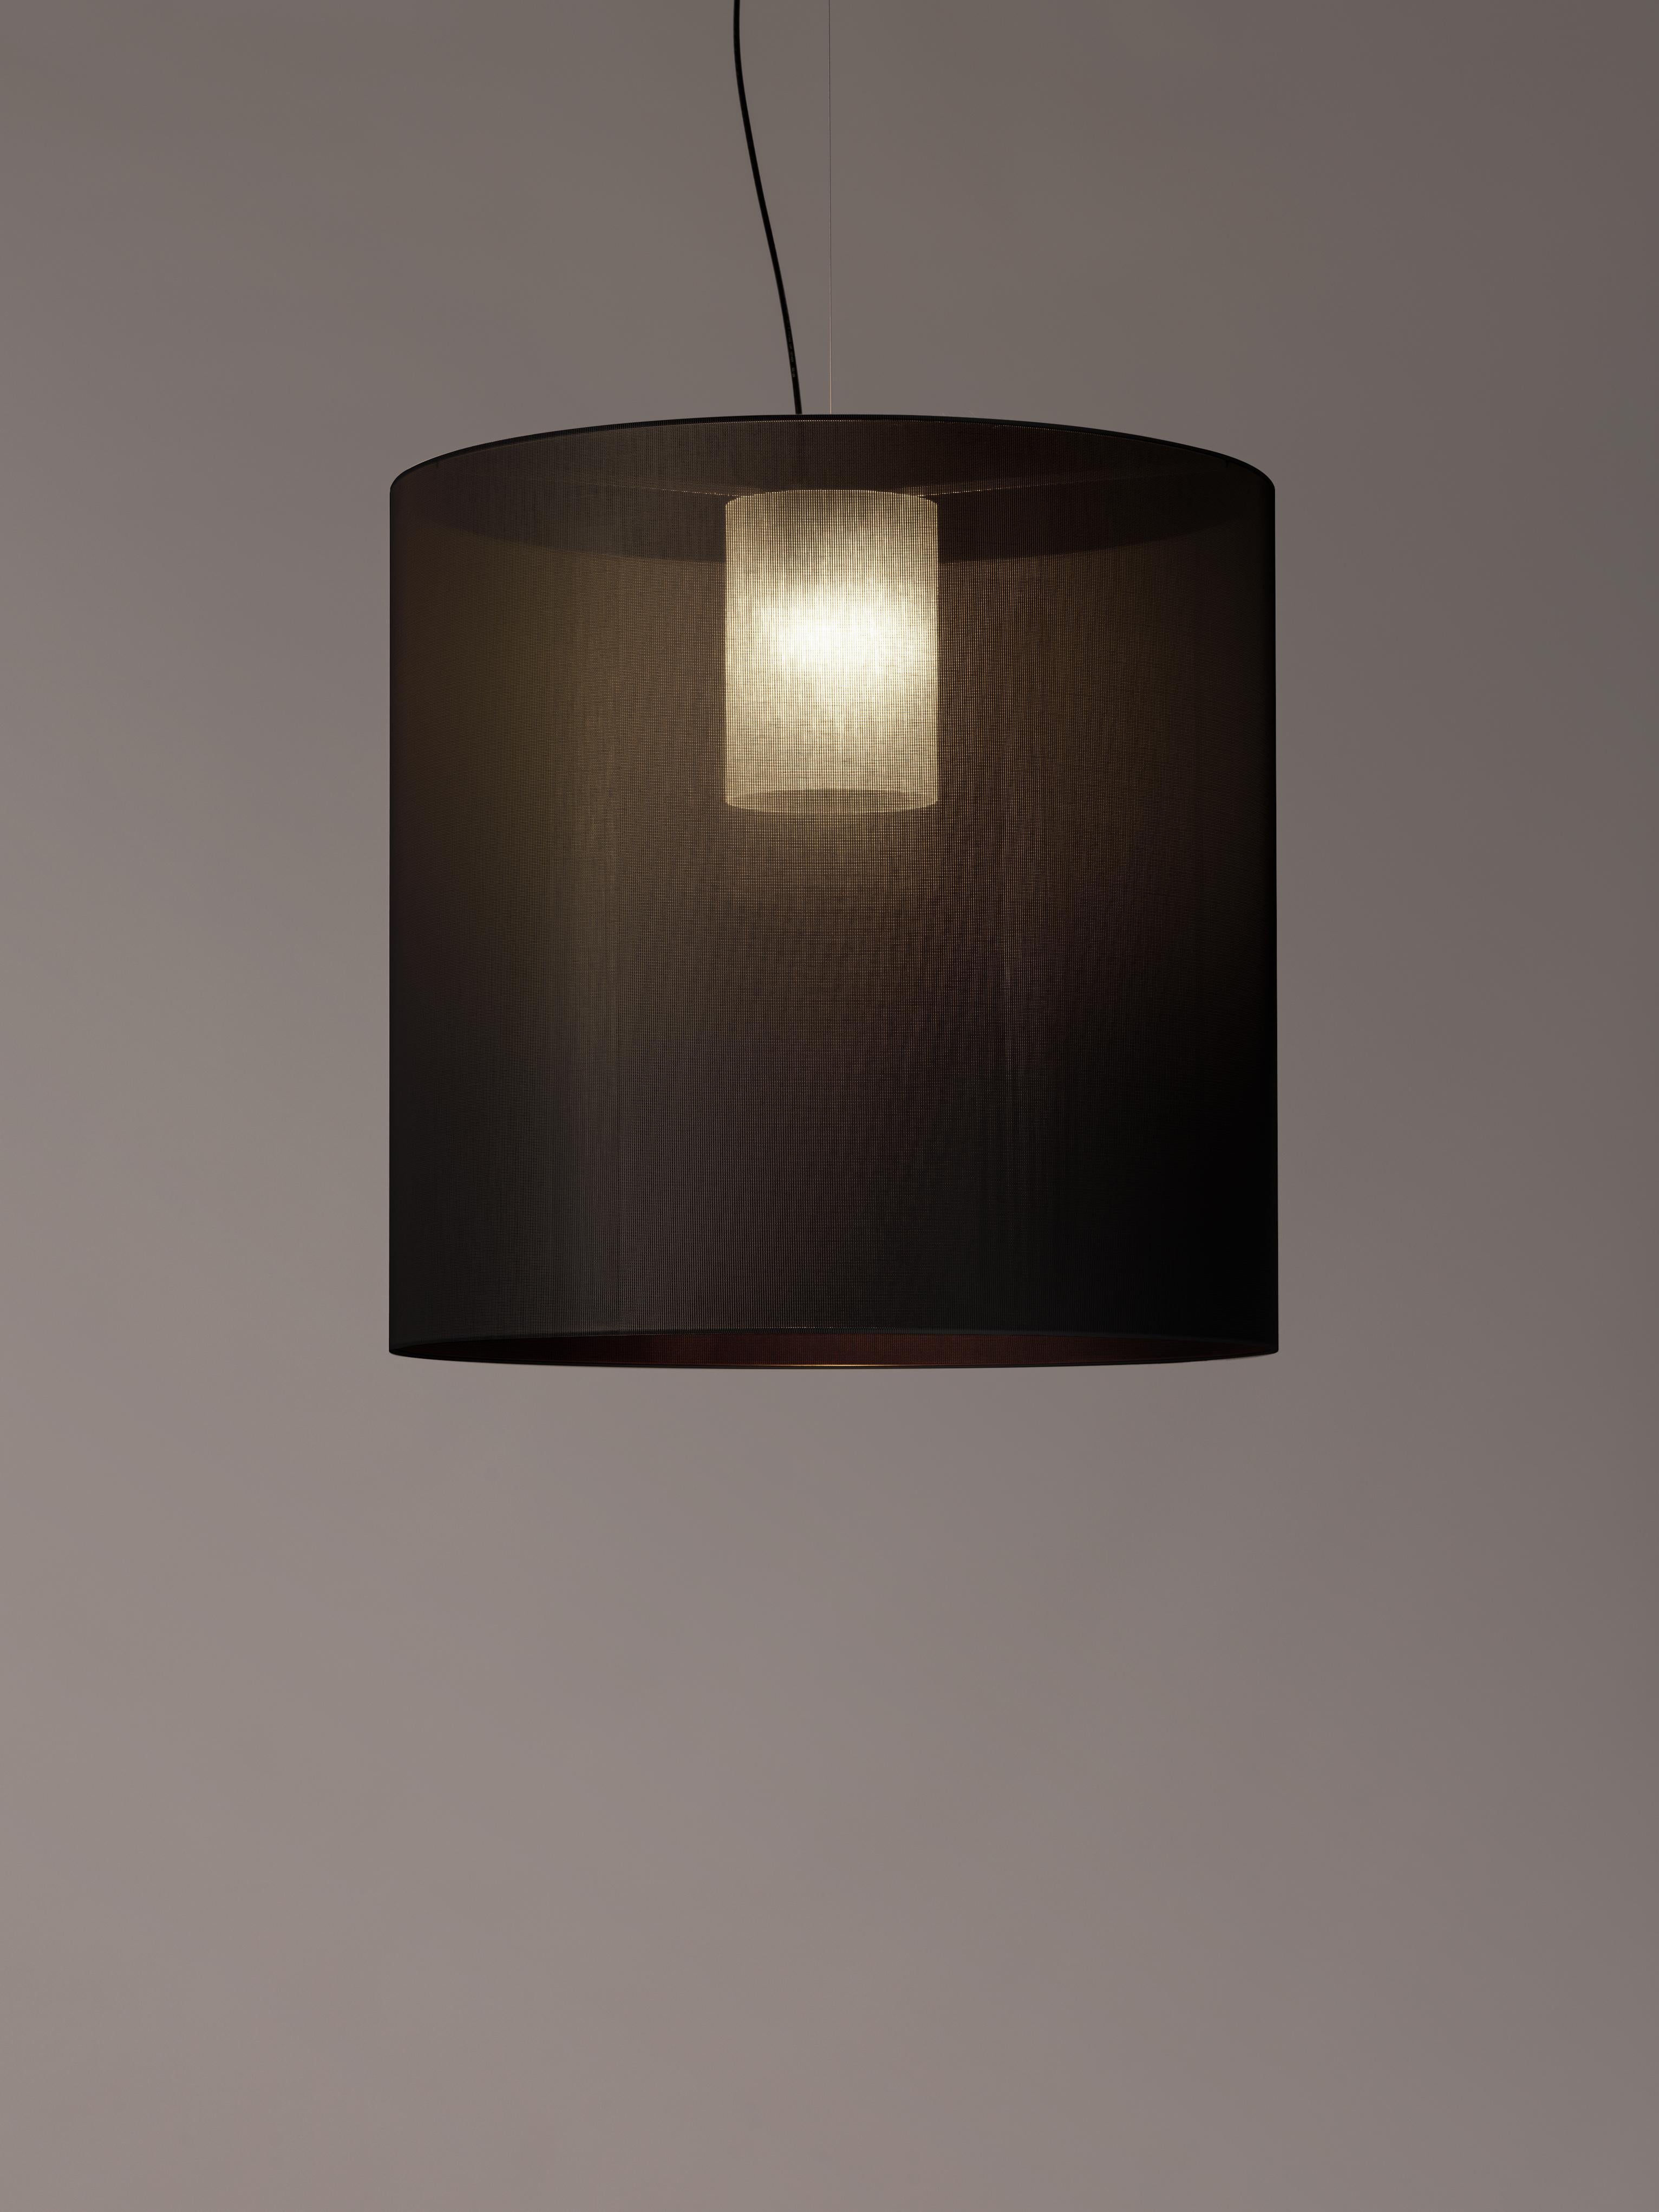 Black Moaré X Pendant Lamp by Antoni Arola.
Dimensions: D 83 x H 81 cm.
Materials: Metal, polyester.
Available in other colors and sizes.

Moaré’s multiple combinations of formats and colours make it highly versatile. The series takes its name